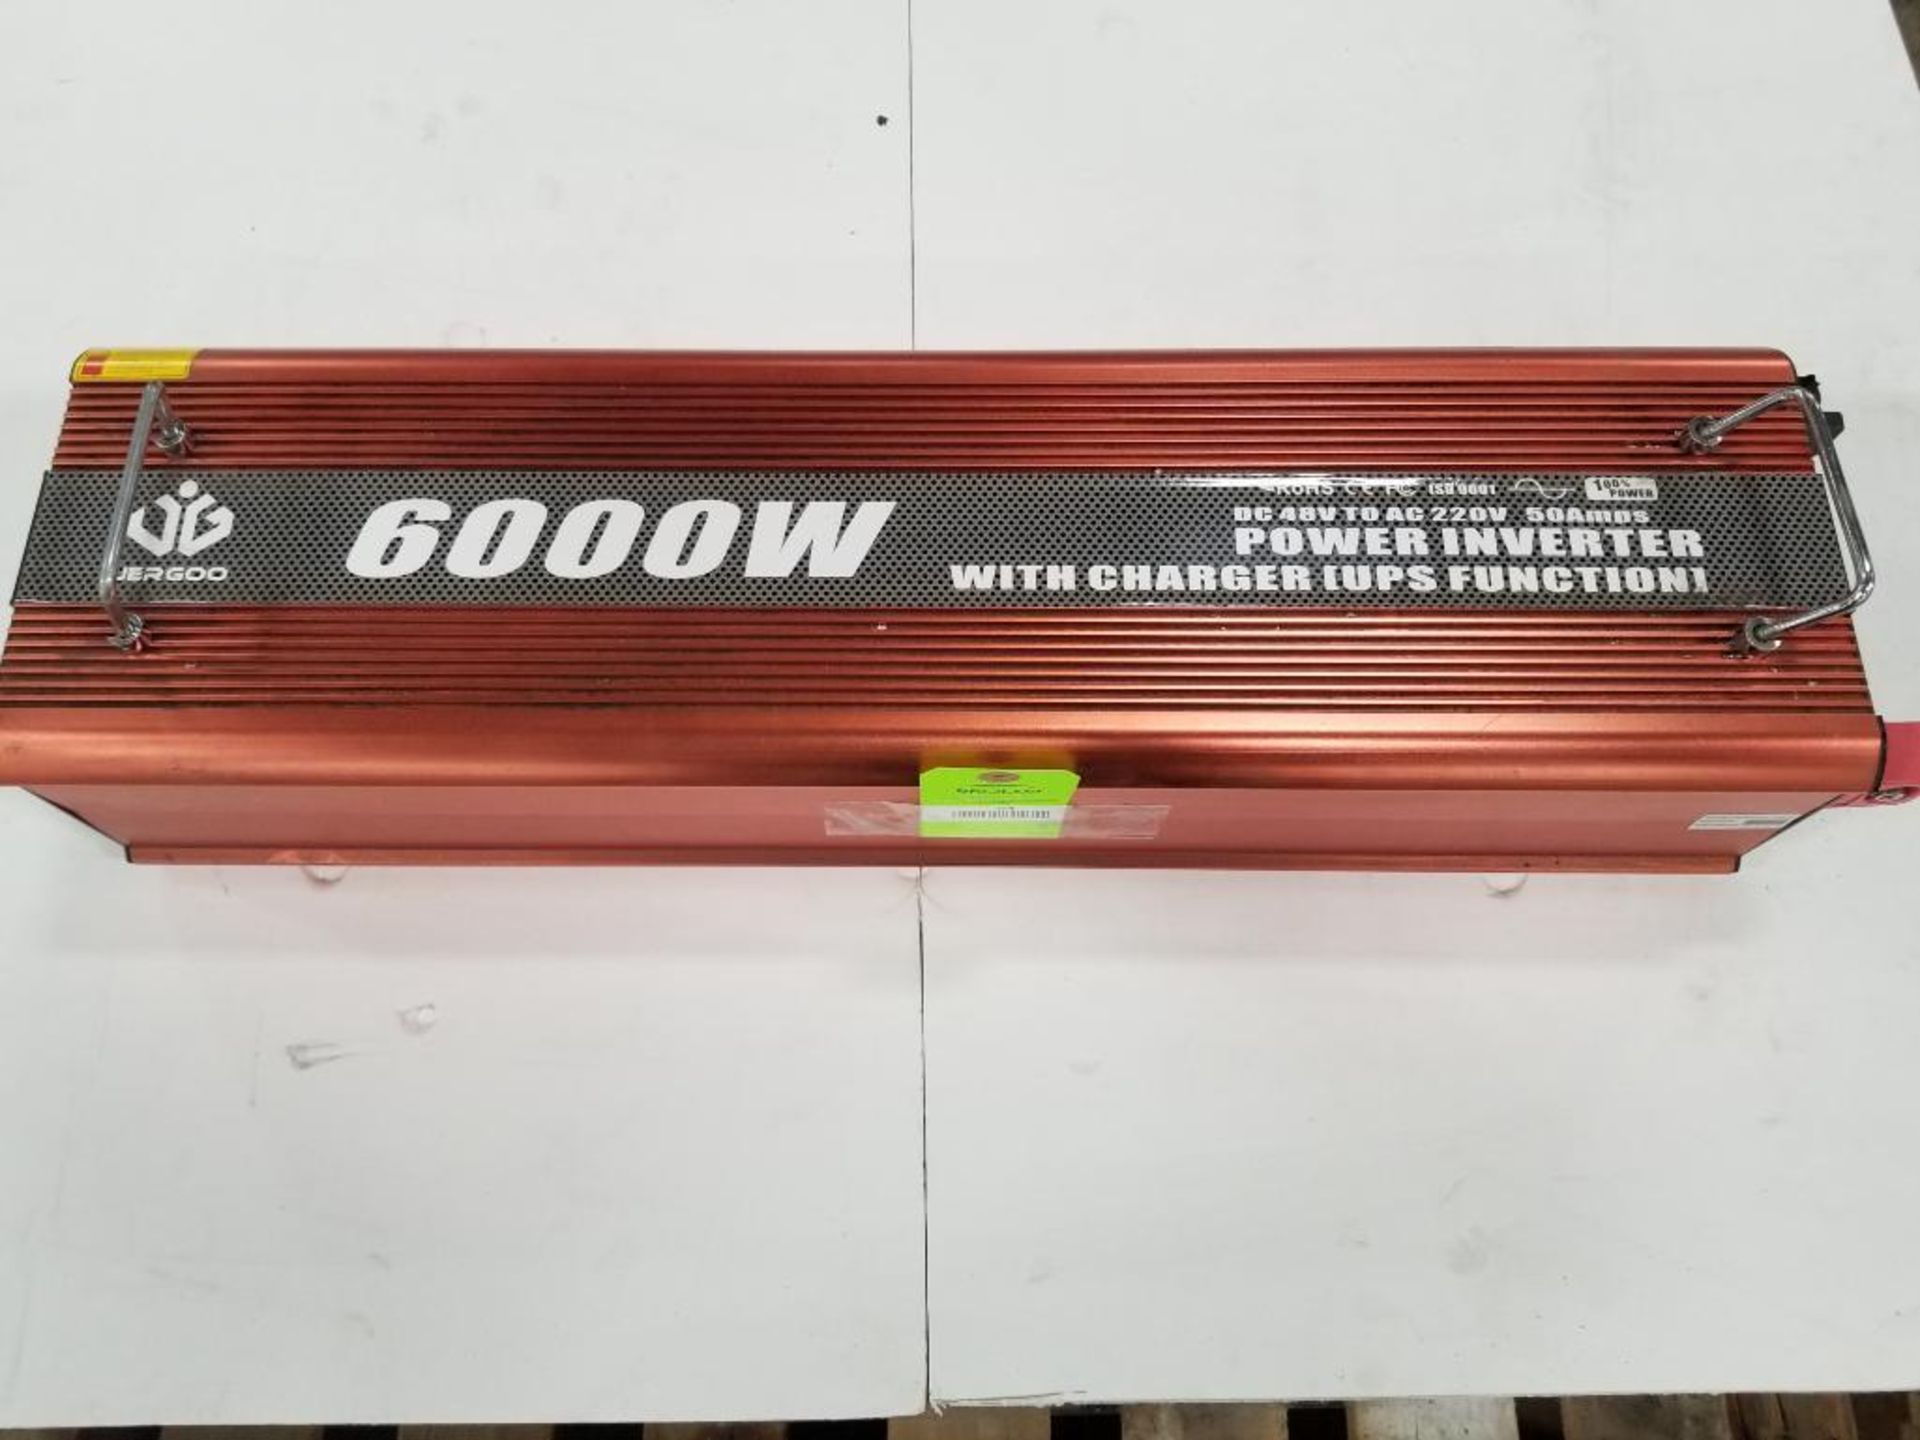 Jergoo 6000W power inverter with charger. New no box.